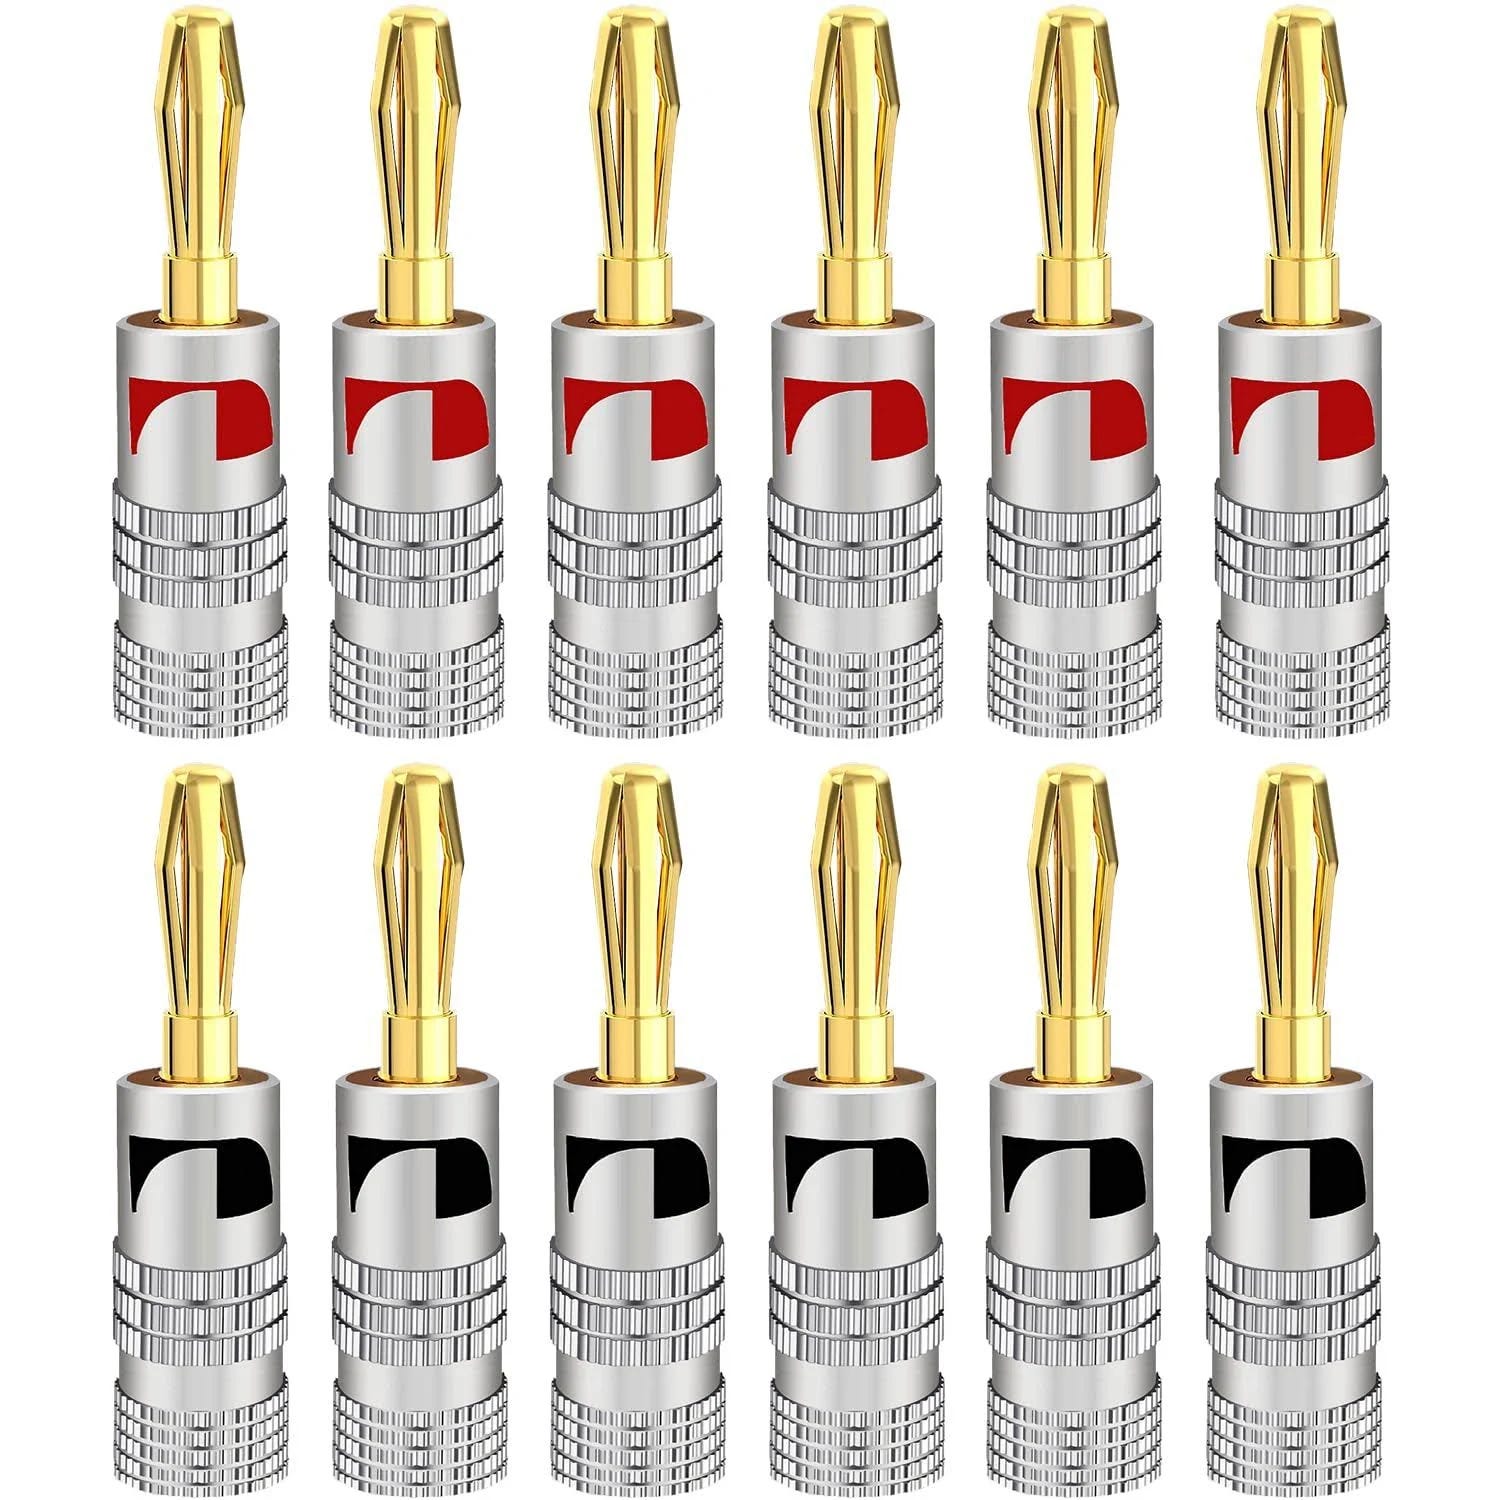 Gold-Plated Speaker Banana Plugs for Easy Installation | Image